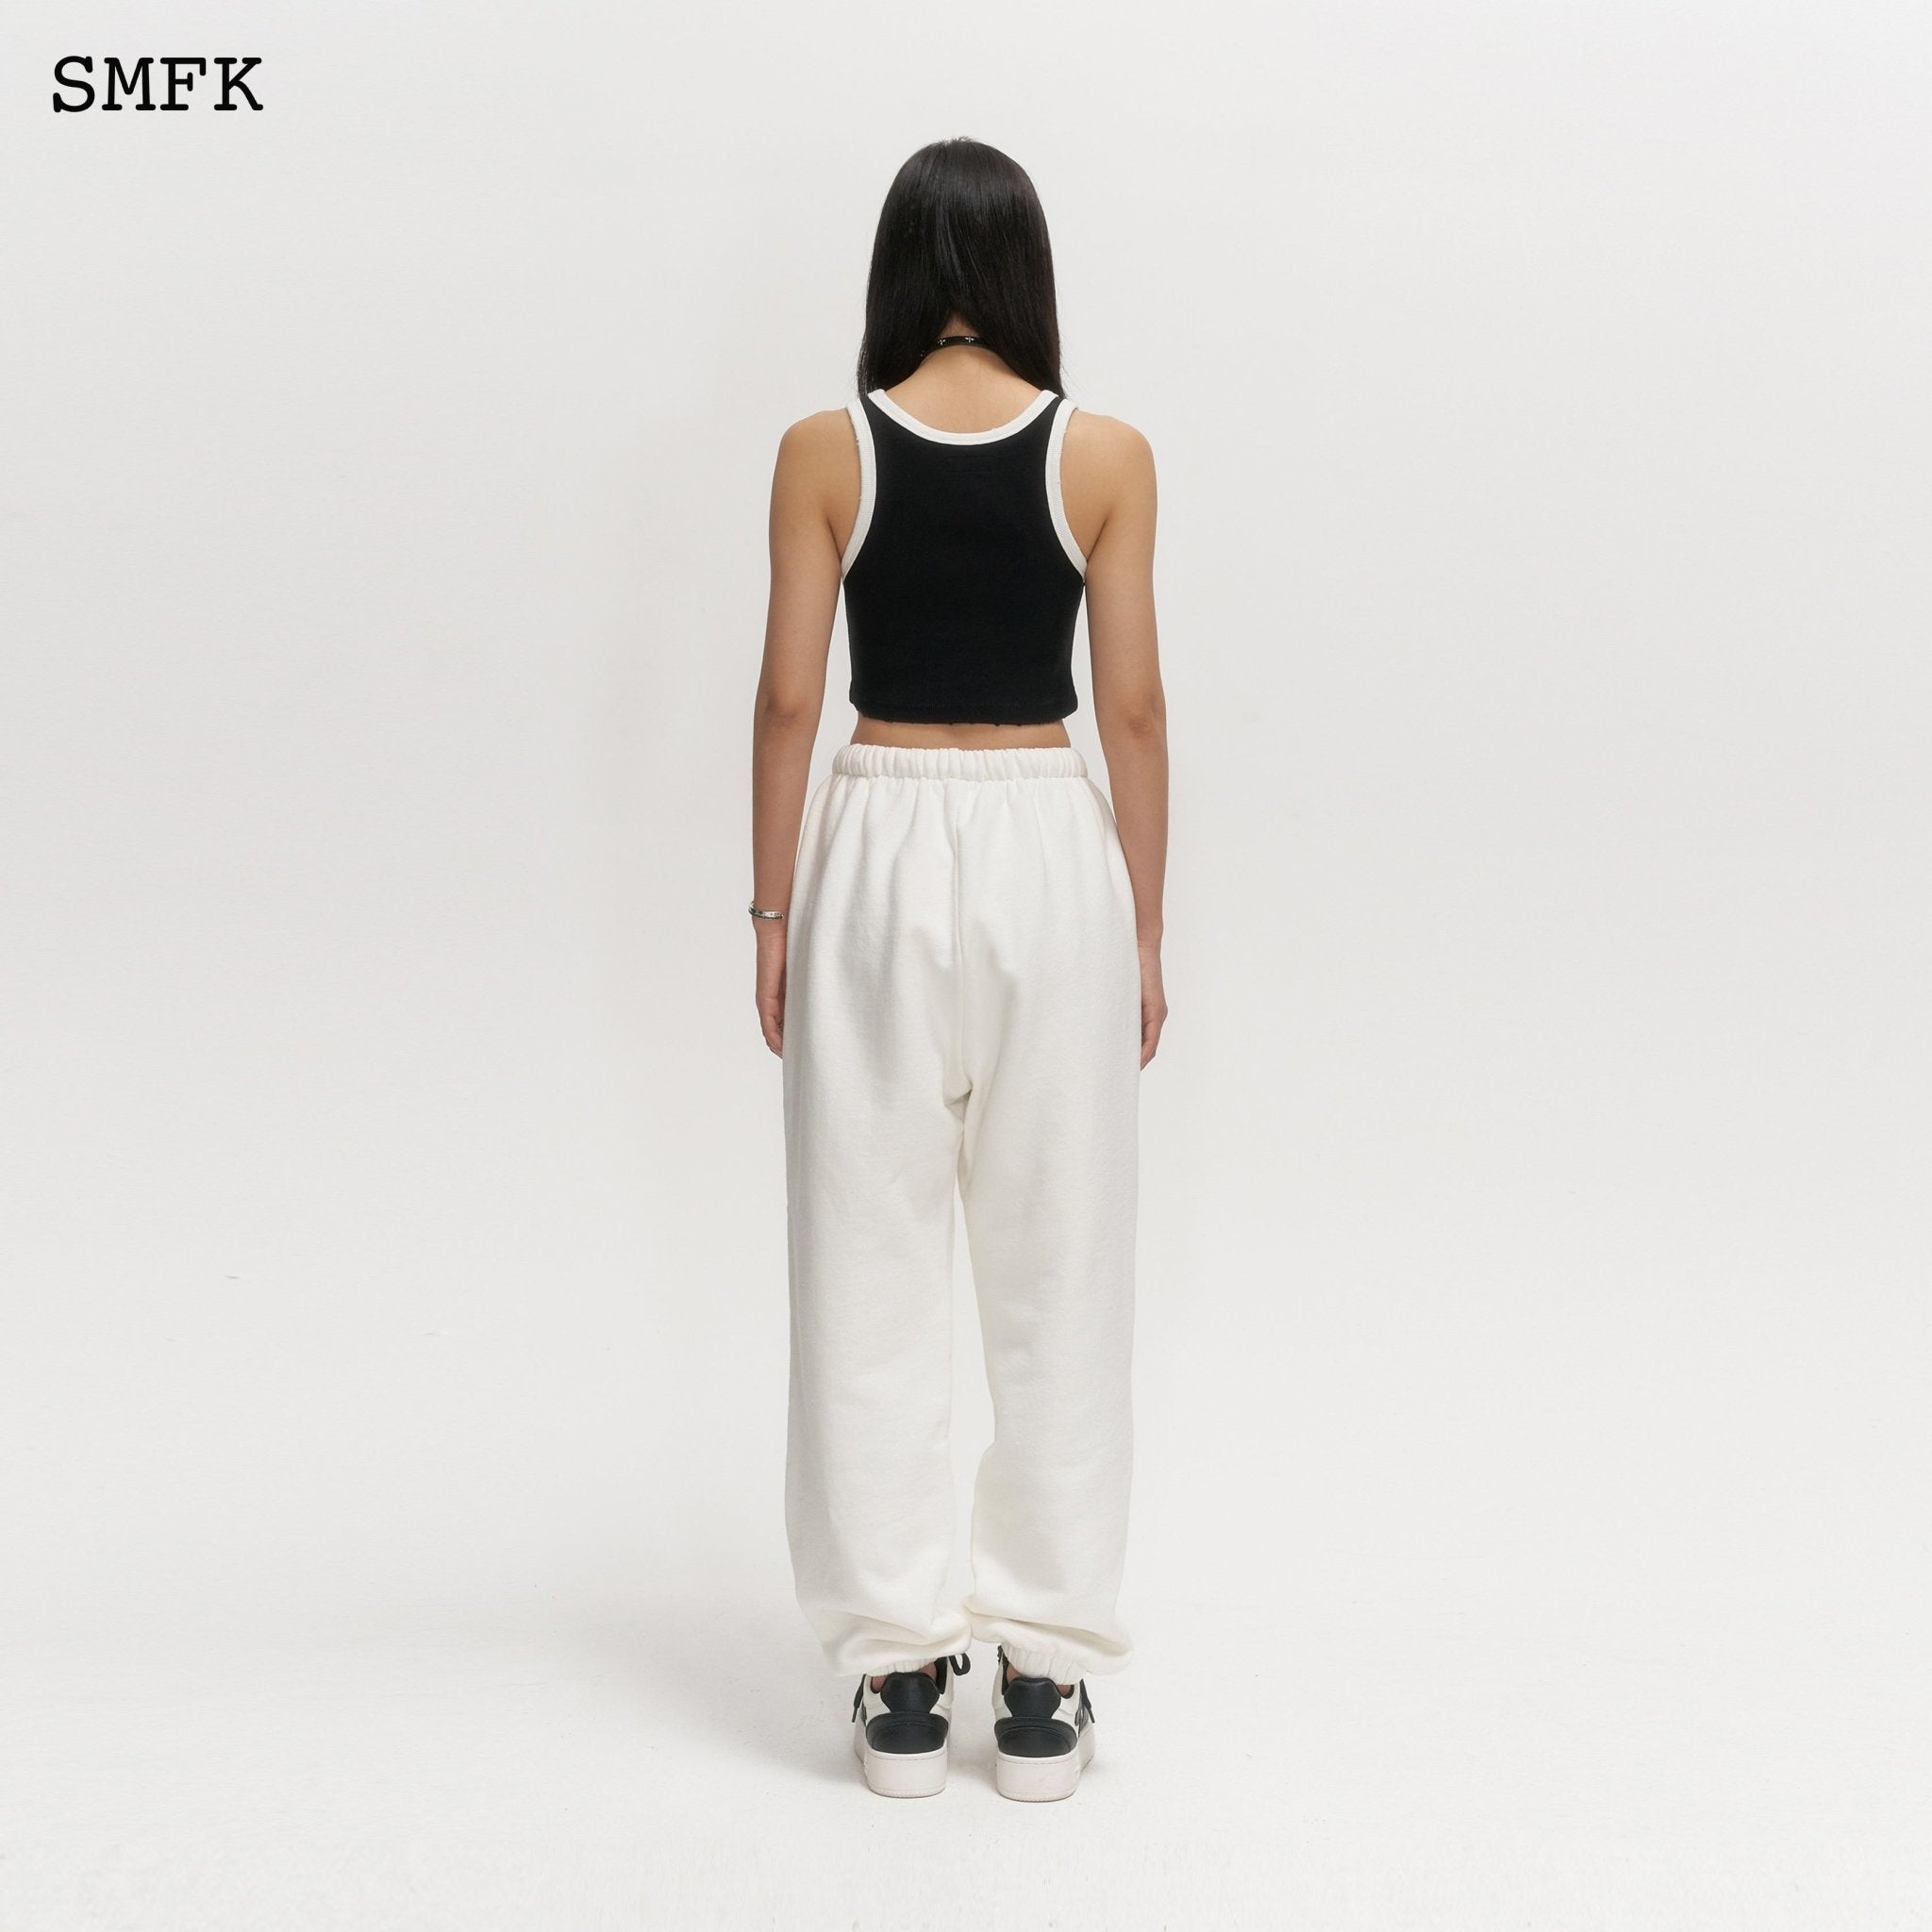 SMFK Compass Black And White Sport Vest | MADA IN CHINA